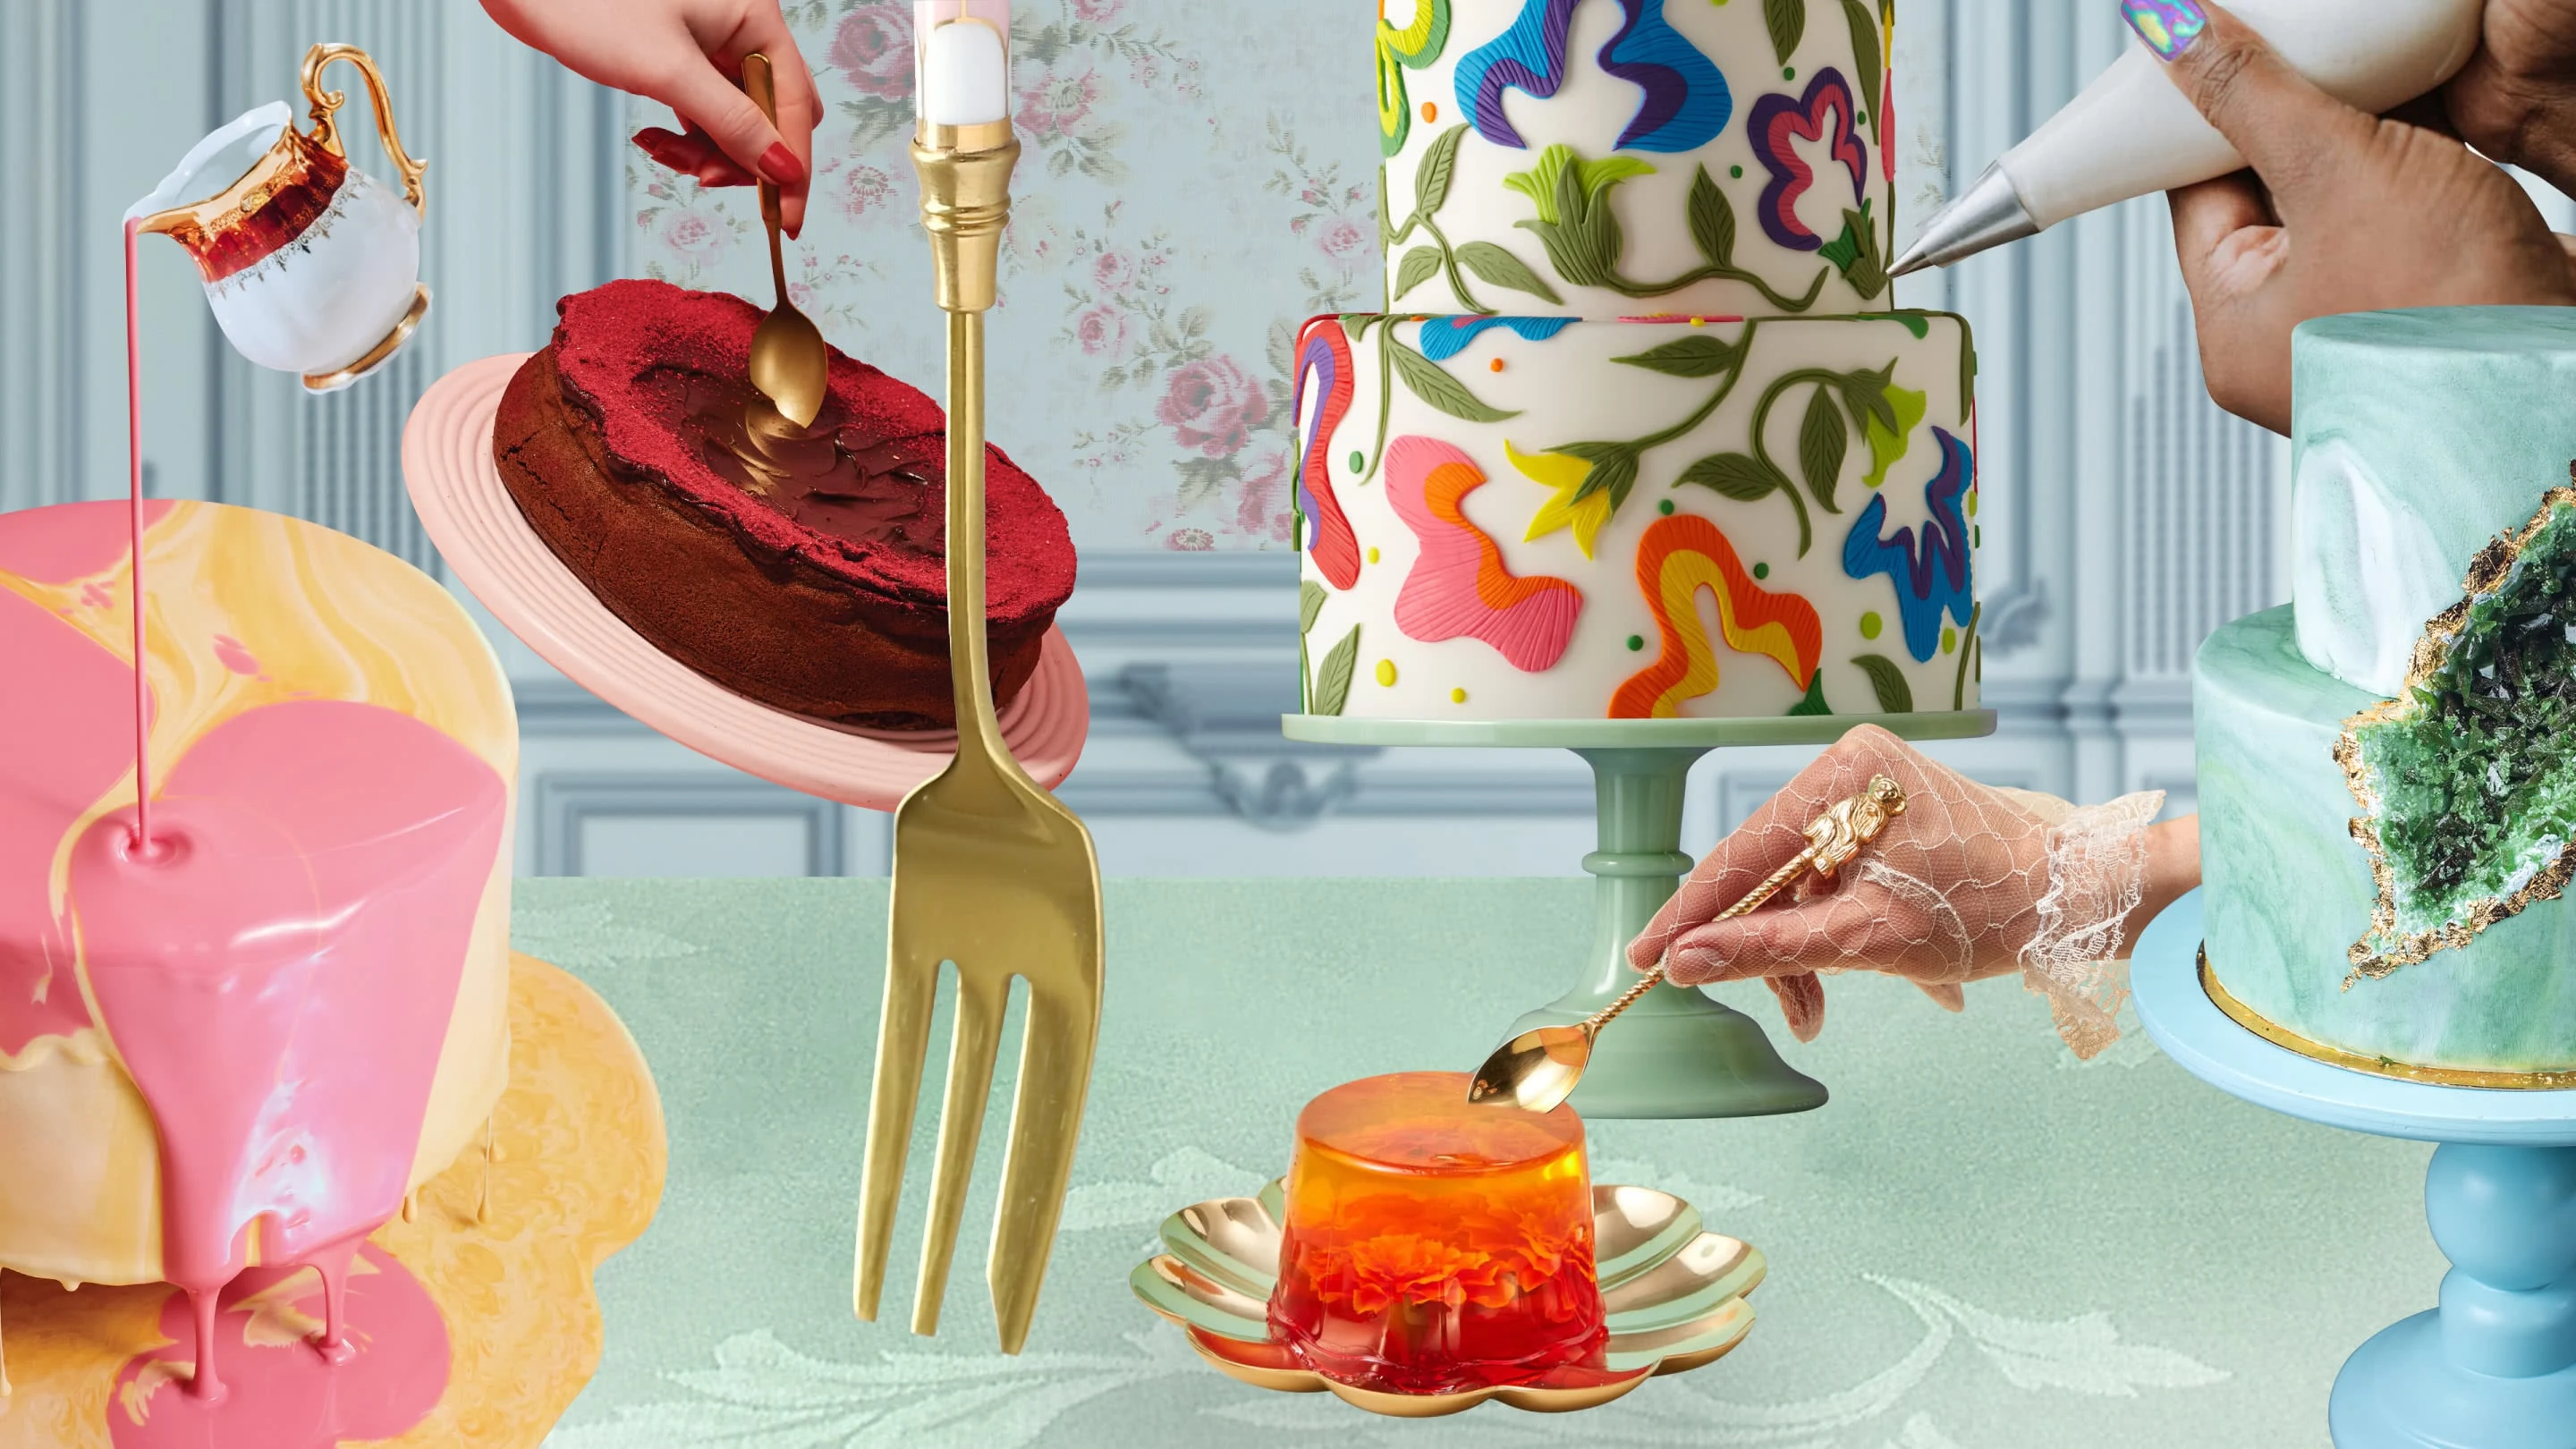 Collage of cakes. Yellow rounded cake with a teacup hovering on top spilling pink icing over it. Red velvet cake with a chocolate centre. Two-tier cake with flowers made out of fondant. Orange jelly cake. Green geode cake. 